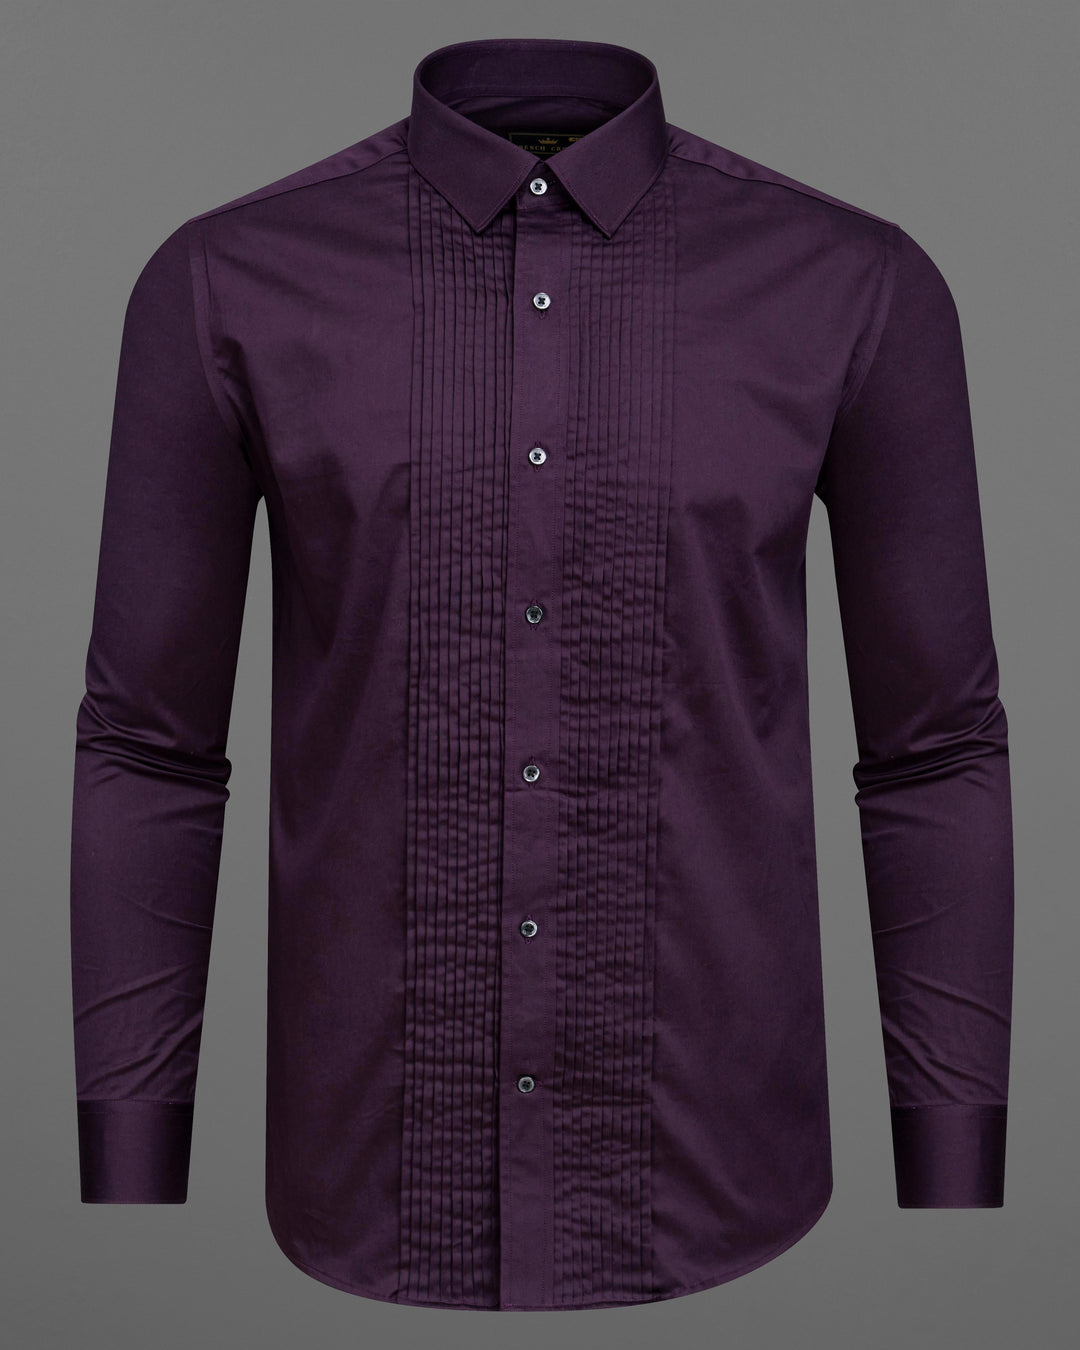 9 Purple Shirt Matching Pant Ideas For Men To Look Stylish